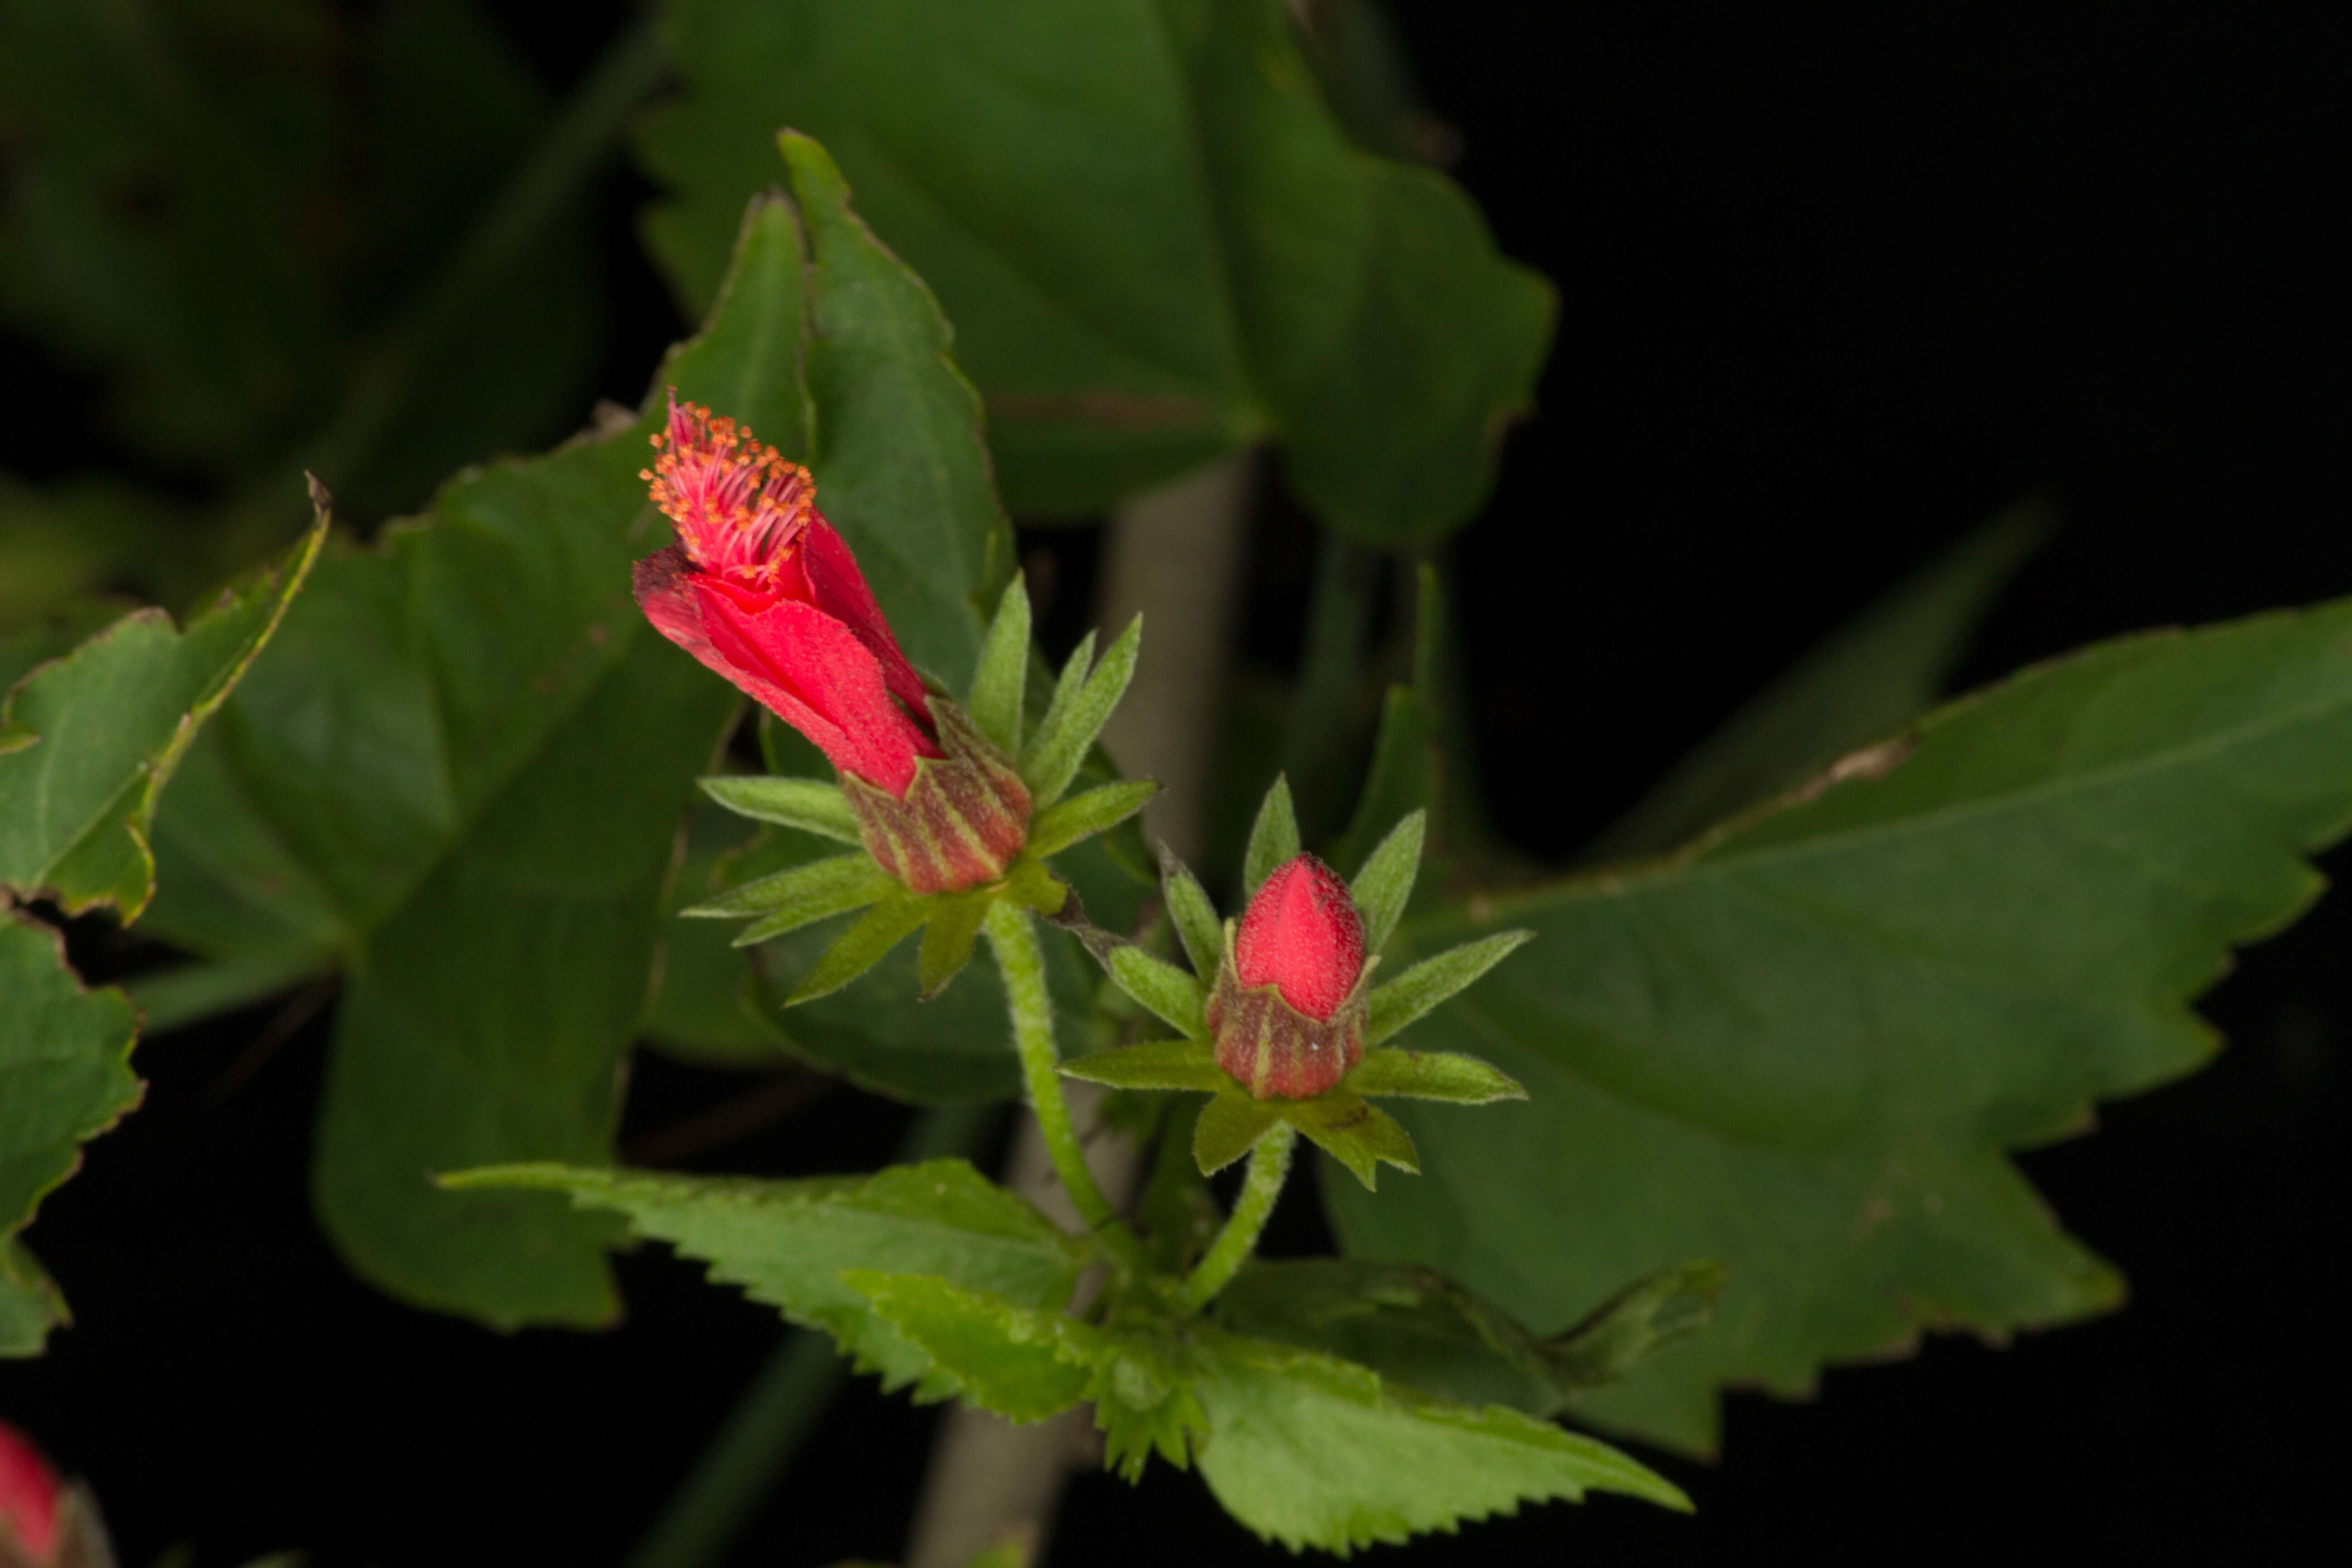 Image of Hibiscus peripteroides P. A. Fryxell